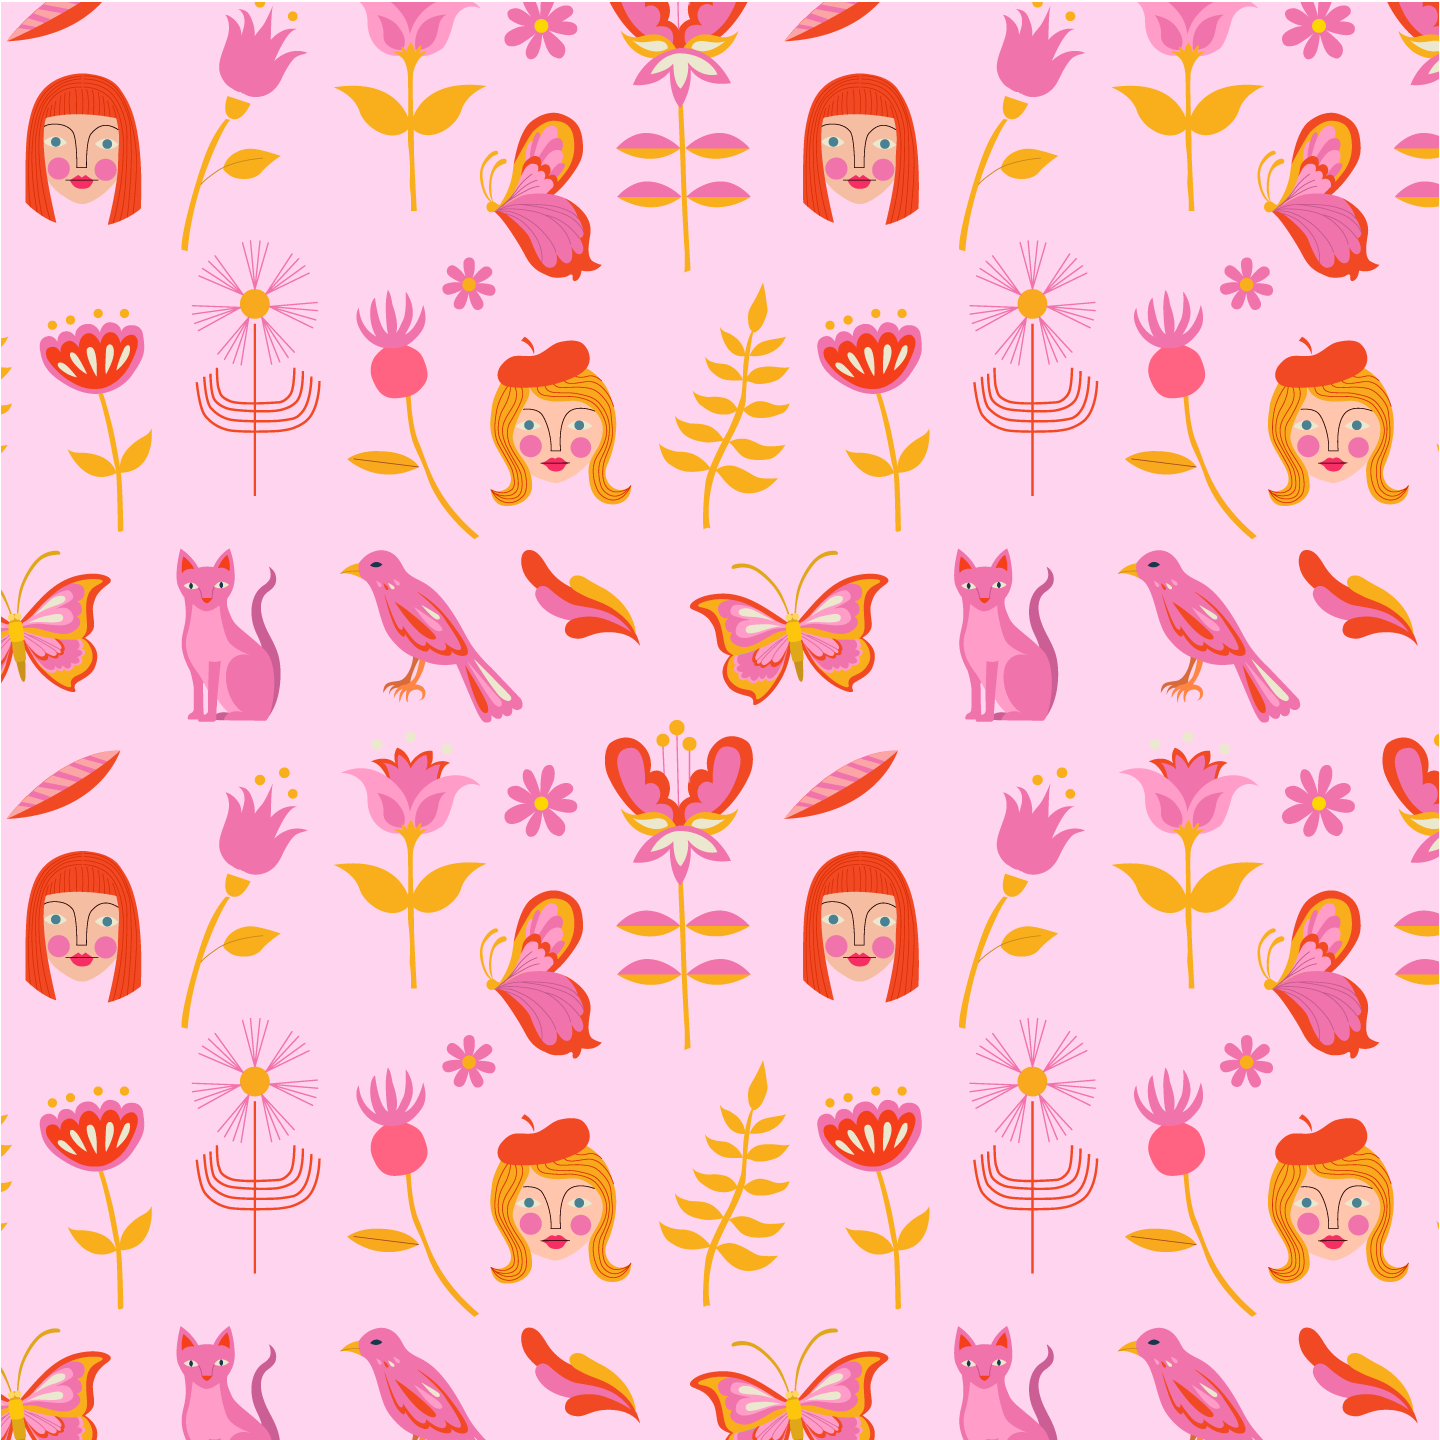 flower-power-patternsquare-2.png